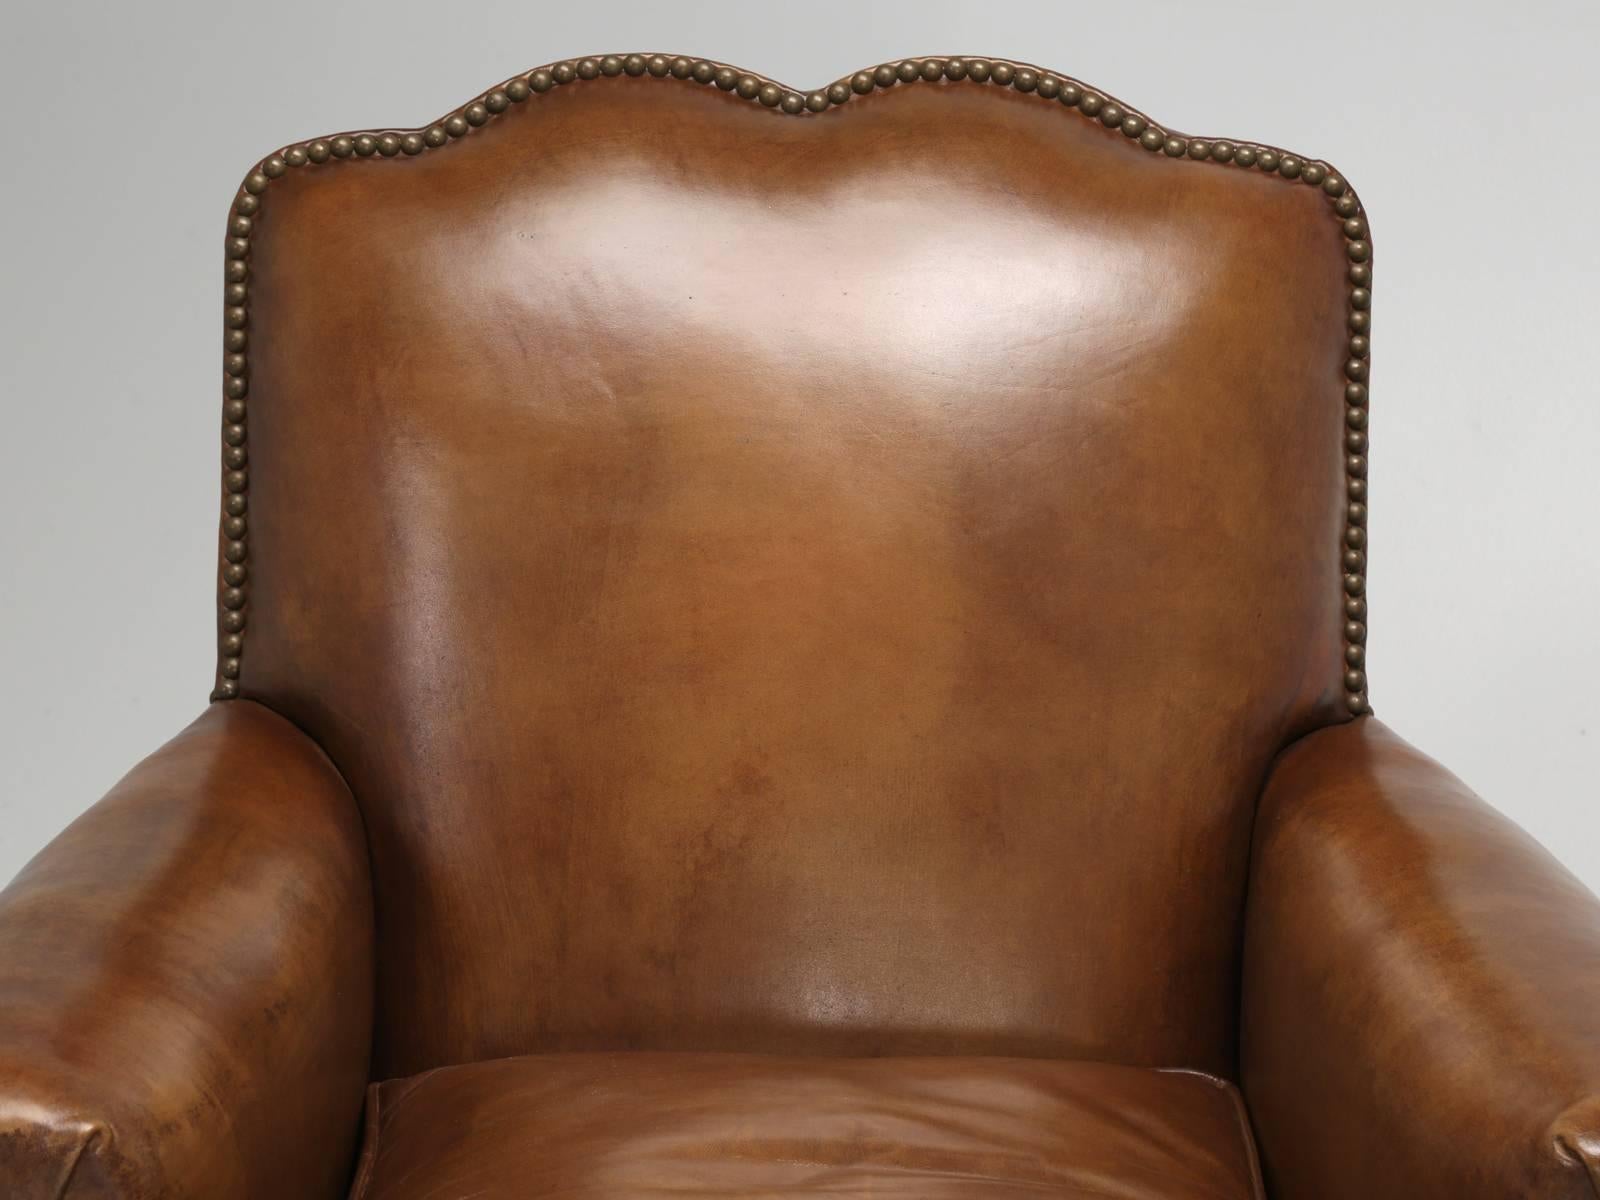 French Art Deco leather club chairs, that our Old Plank Upholstery shop, has completely and thoroughly restored, from the wooden frame up. Unfortunately, as hard as we tried, we could not save the leather on this pair of French Art Deco leather club